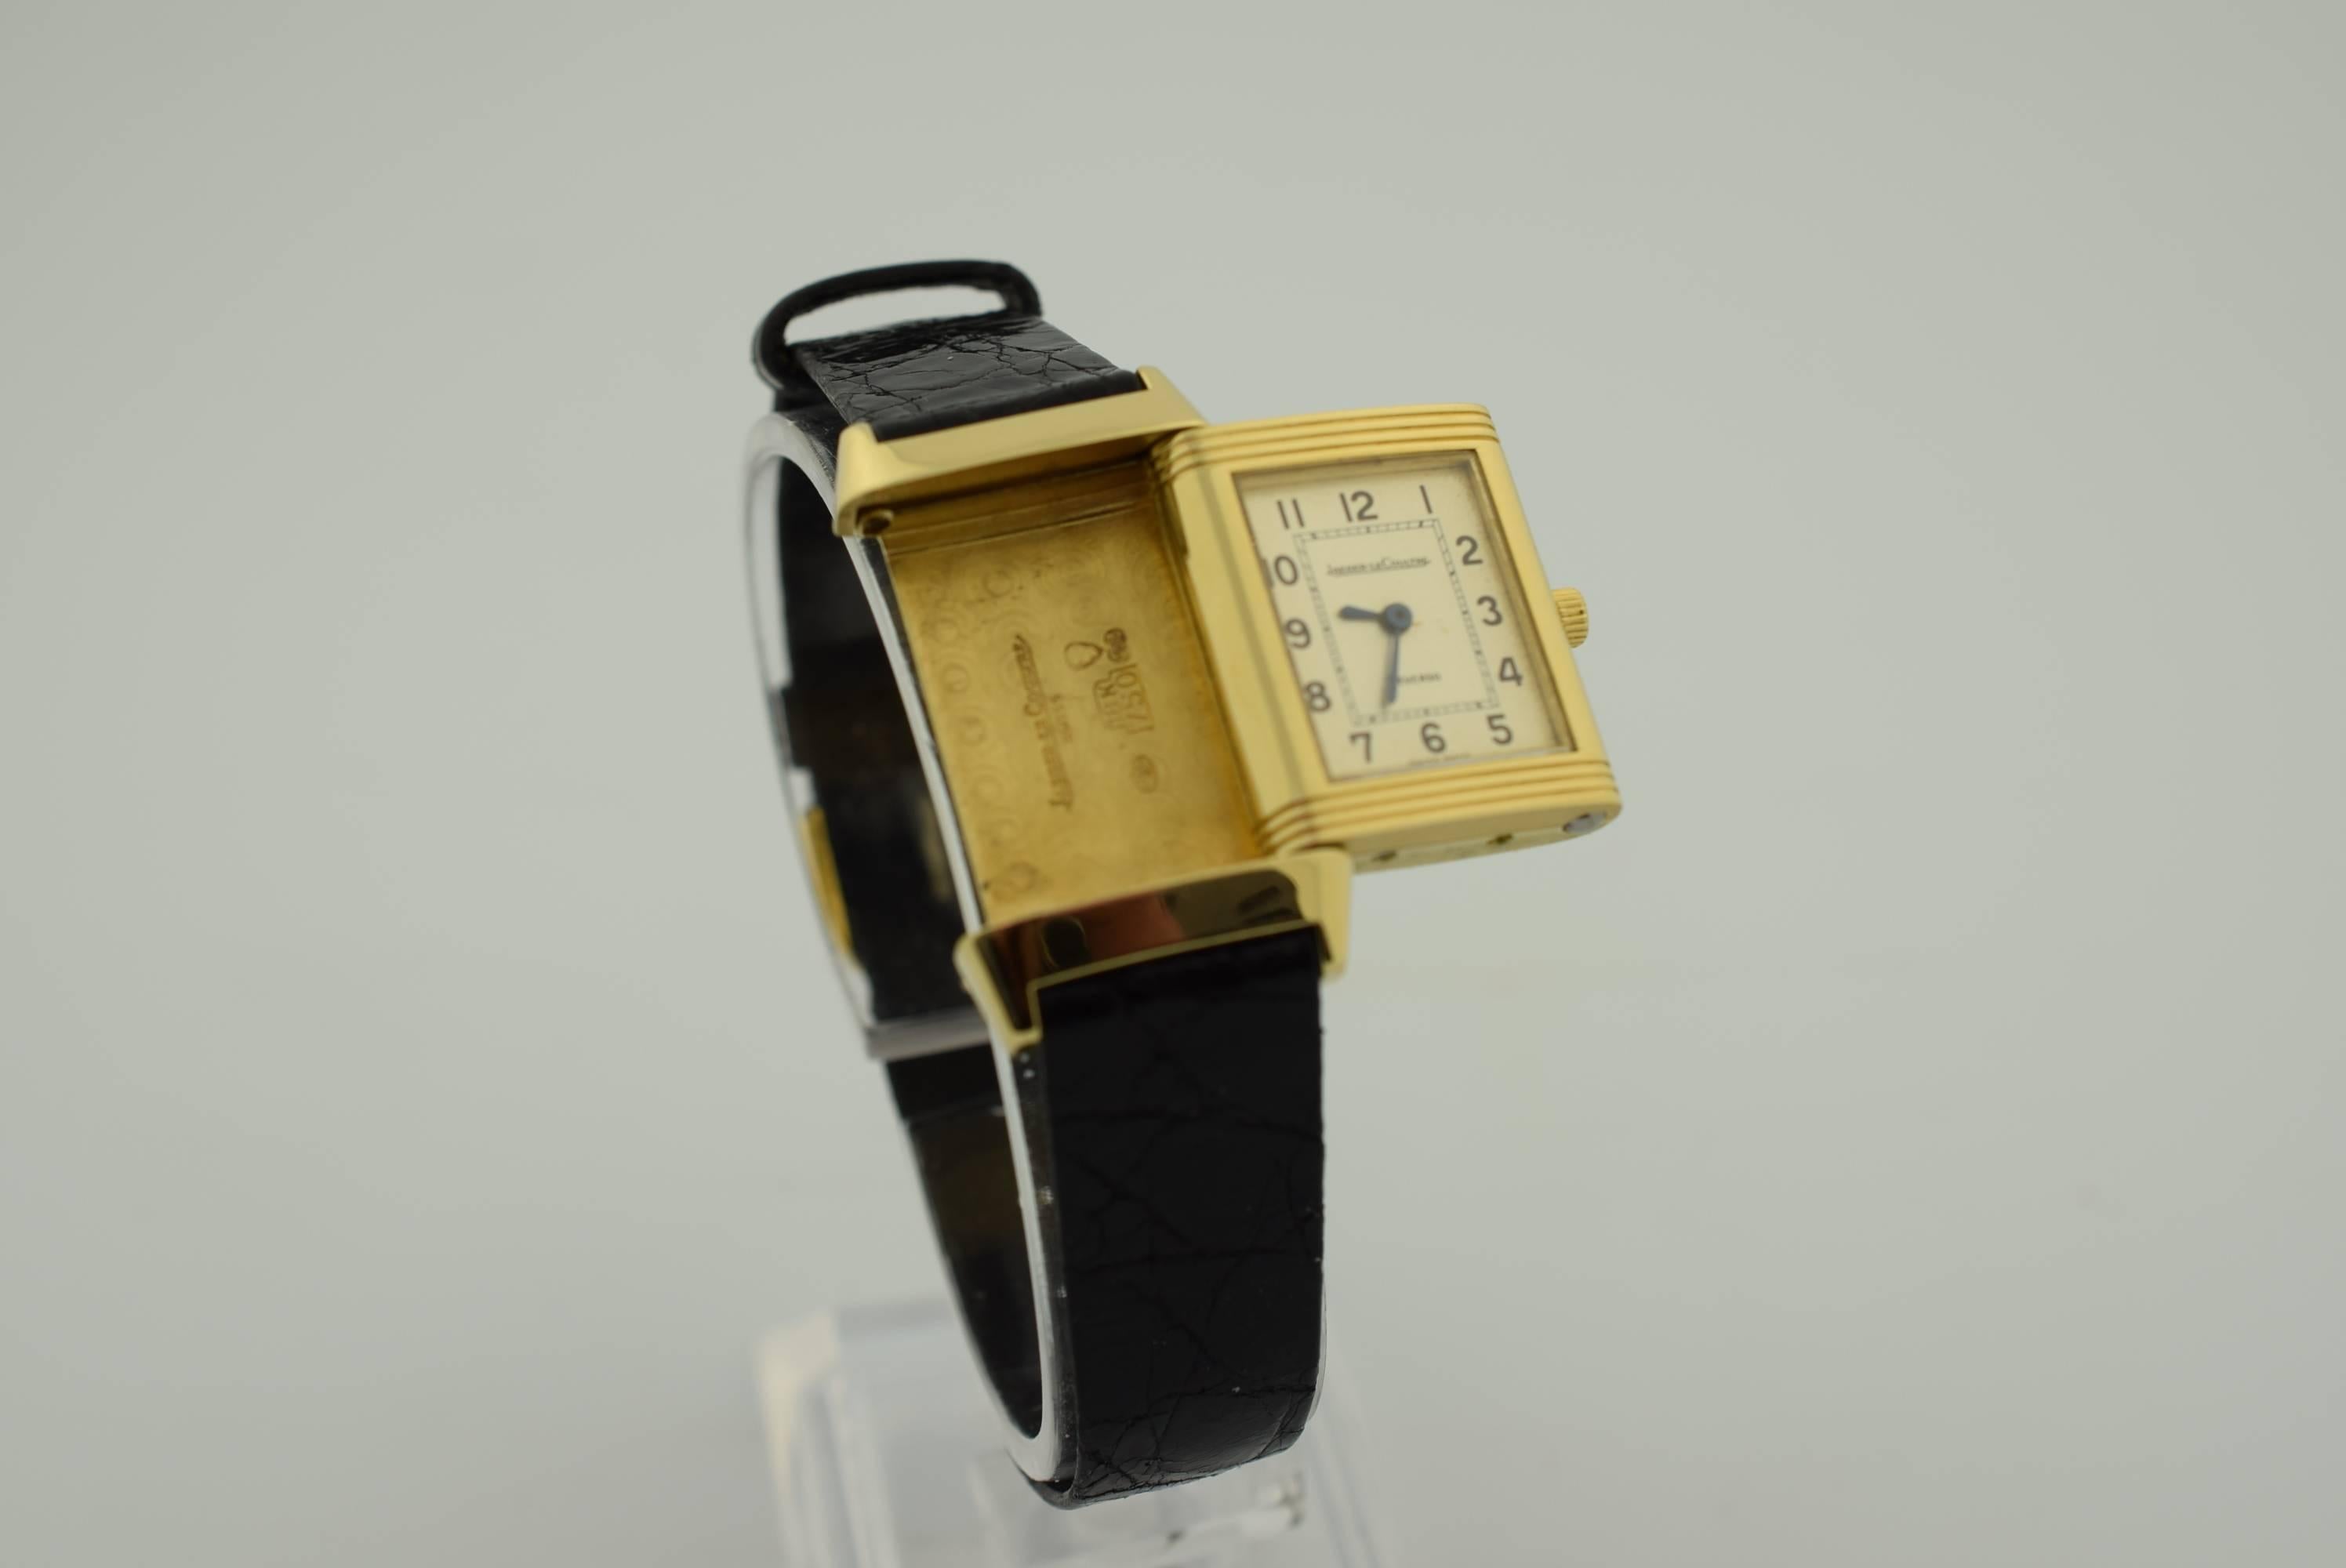 Lady's Jaeger Le coultre 18 k yellow gold Reverso .

Swiss Quartz movement .Excellent condition.Serial numbers 1674367 .Circa 2005 -Present .Leather strap .Silver dial with Arabic numerals .A great classic . Warranted for one year from date of